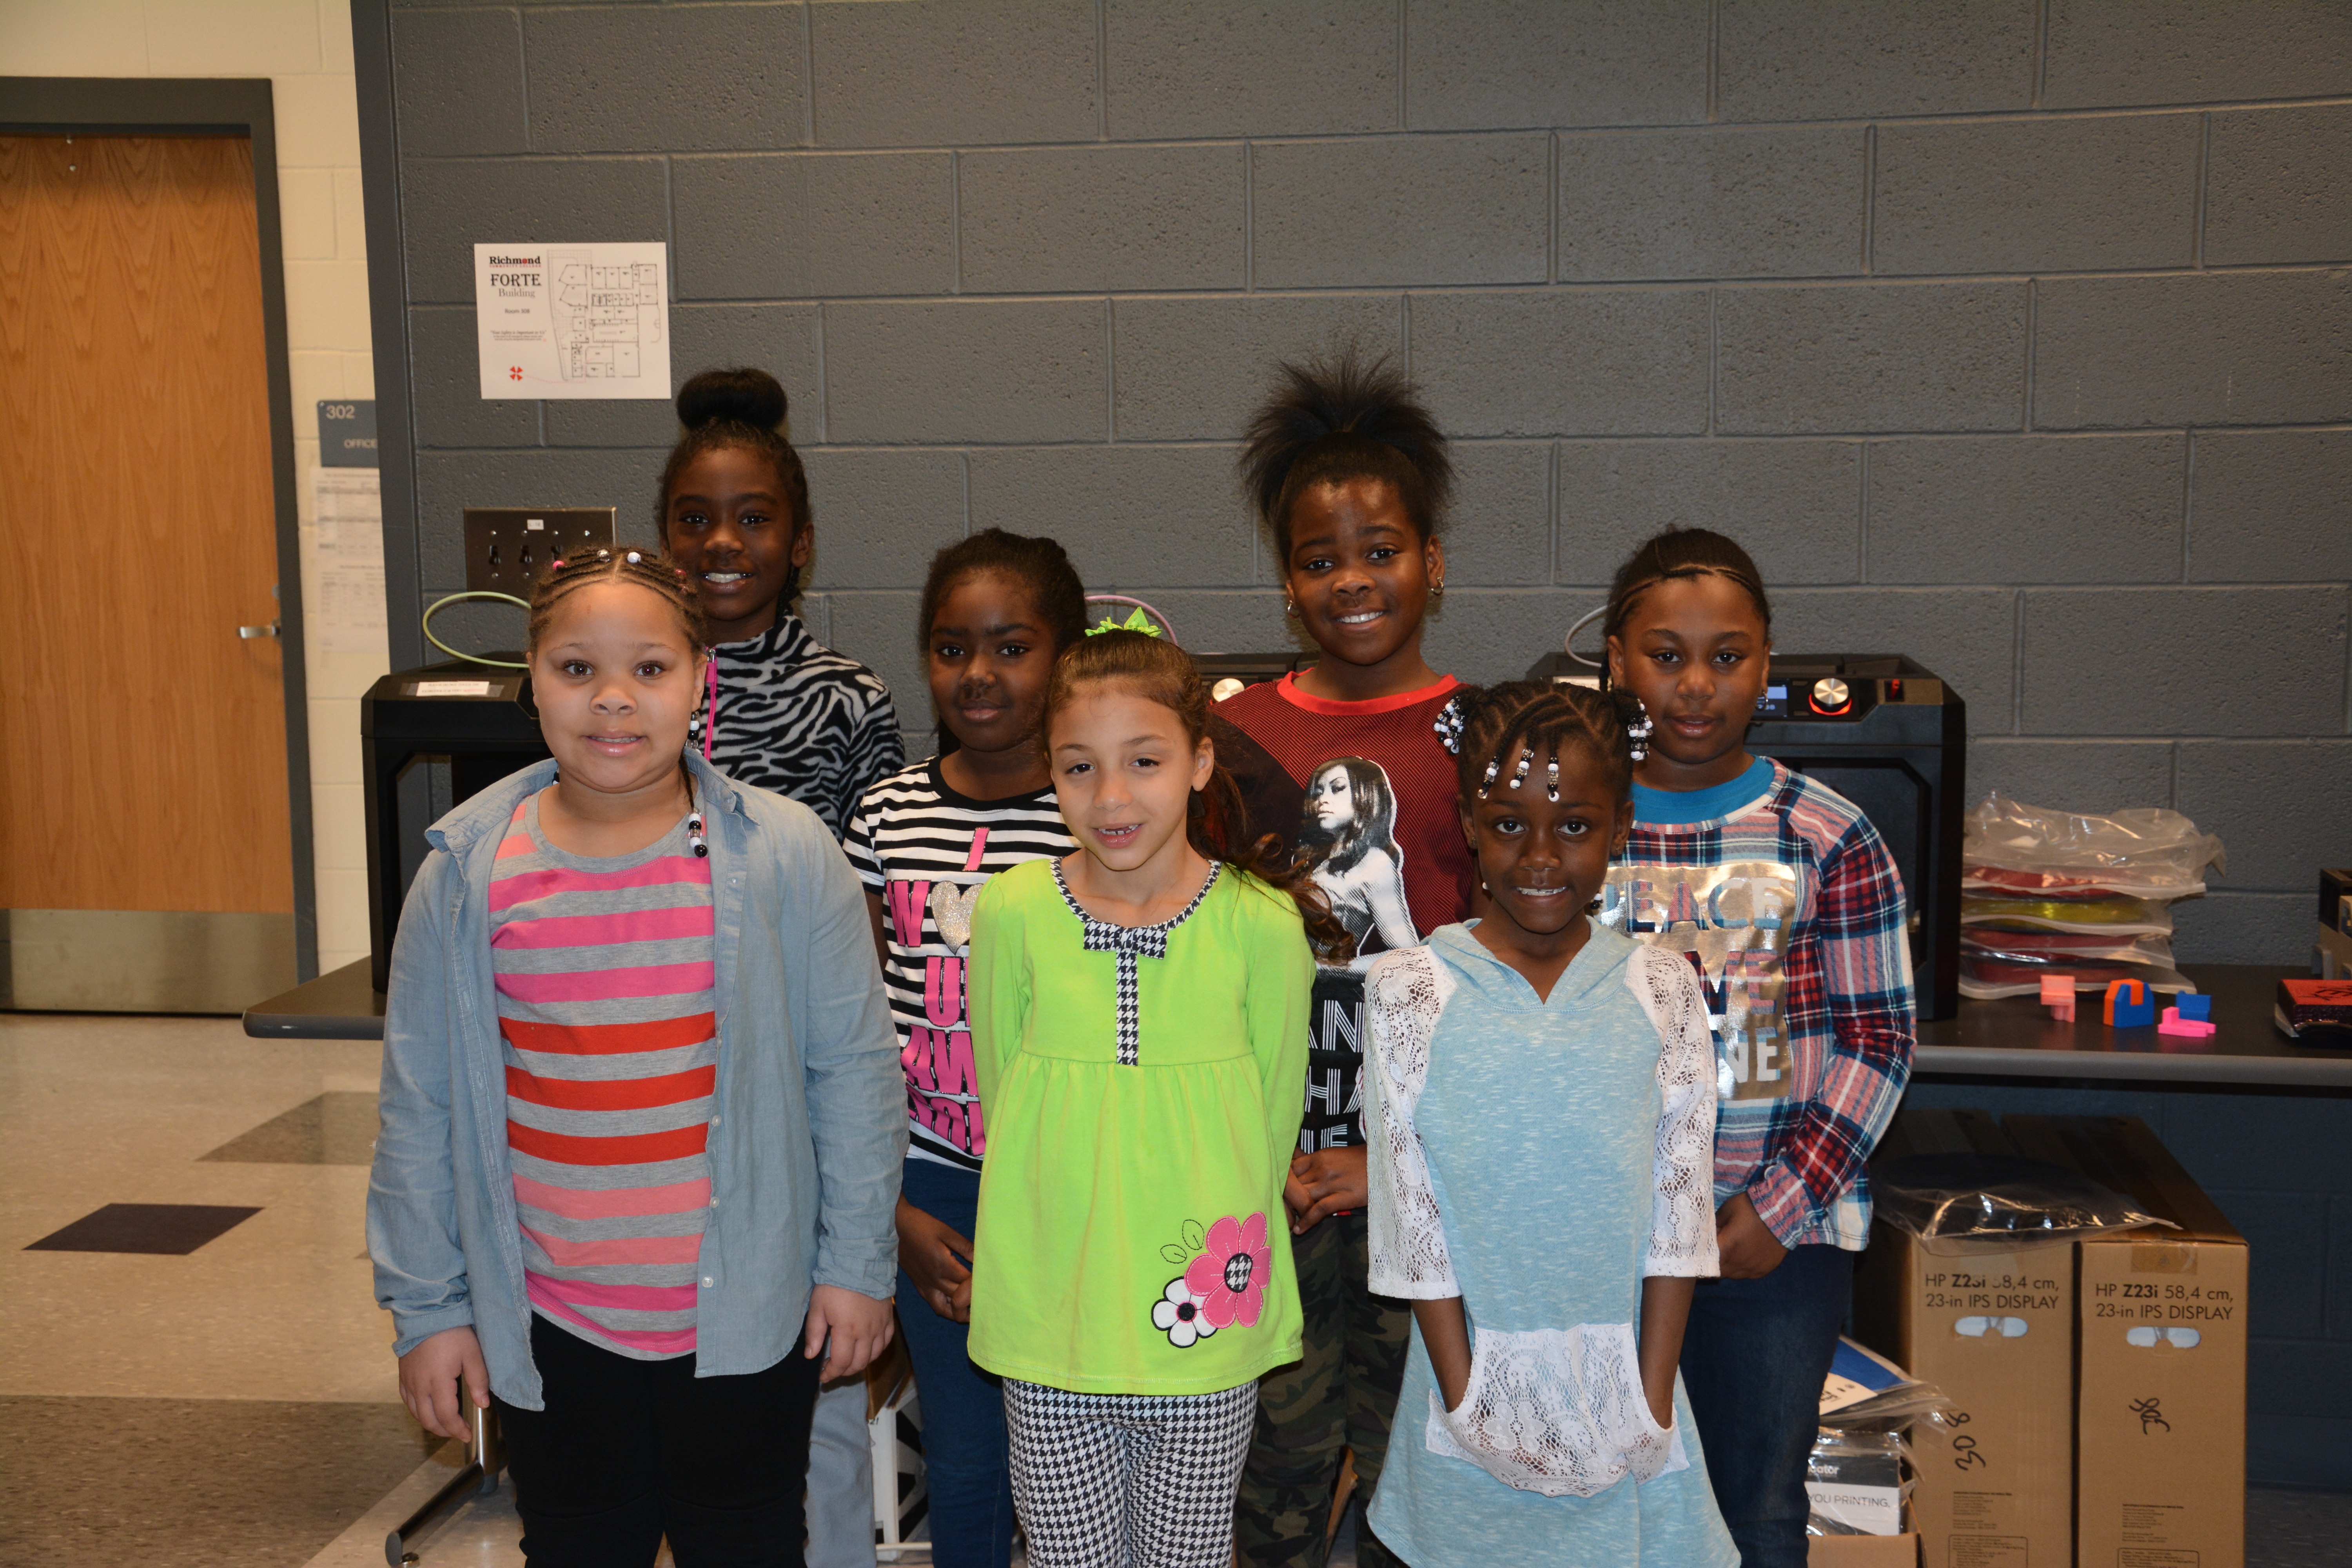 Pictured are the Cinderella Girls who learned about 3D printing while making and decorating jewelry at Richmond Community College under the guidance of Mechanical Engineering instructor Annie Smith.